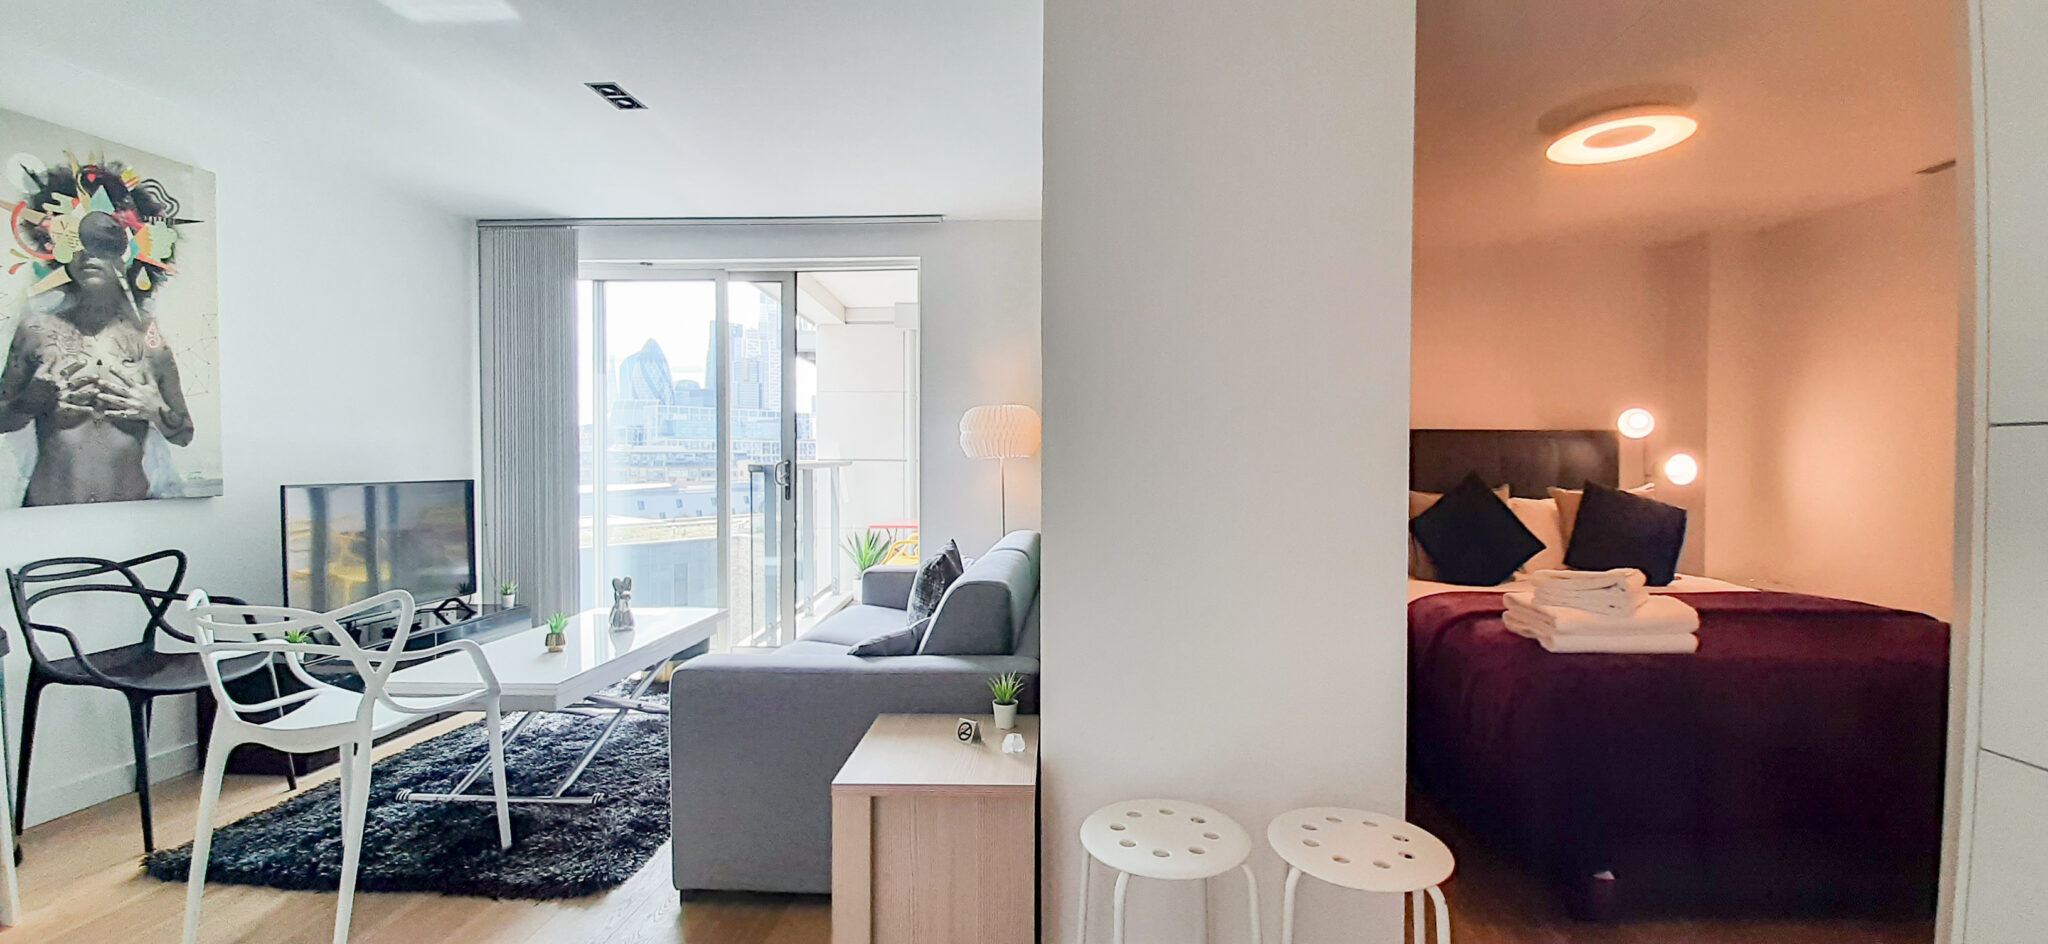 Experience urban living in London's coolest neighbourhood by booking Avantgarde Place Serviced Apartments in Shoreditch. Book your stay today | Urban Stay